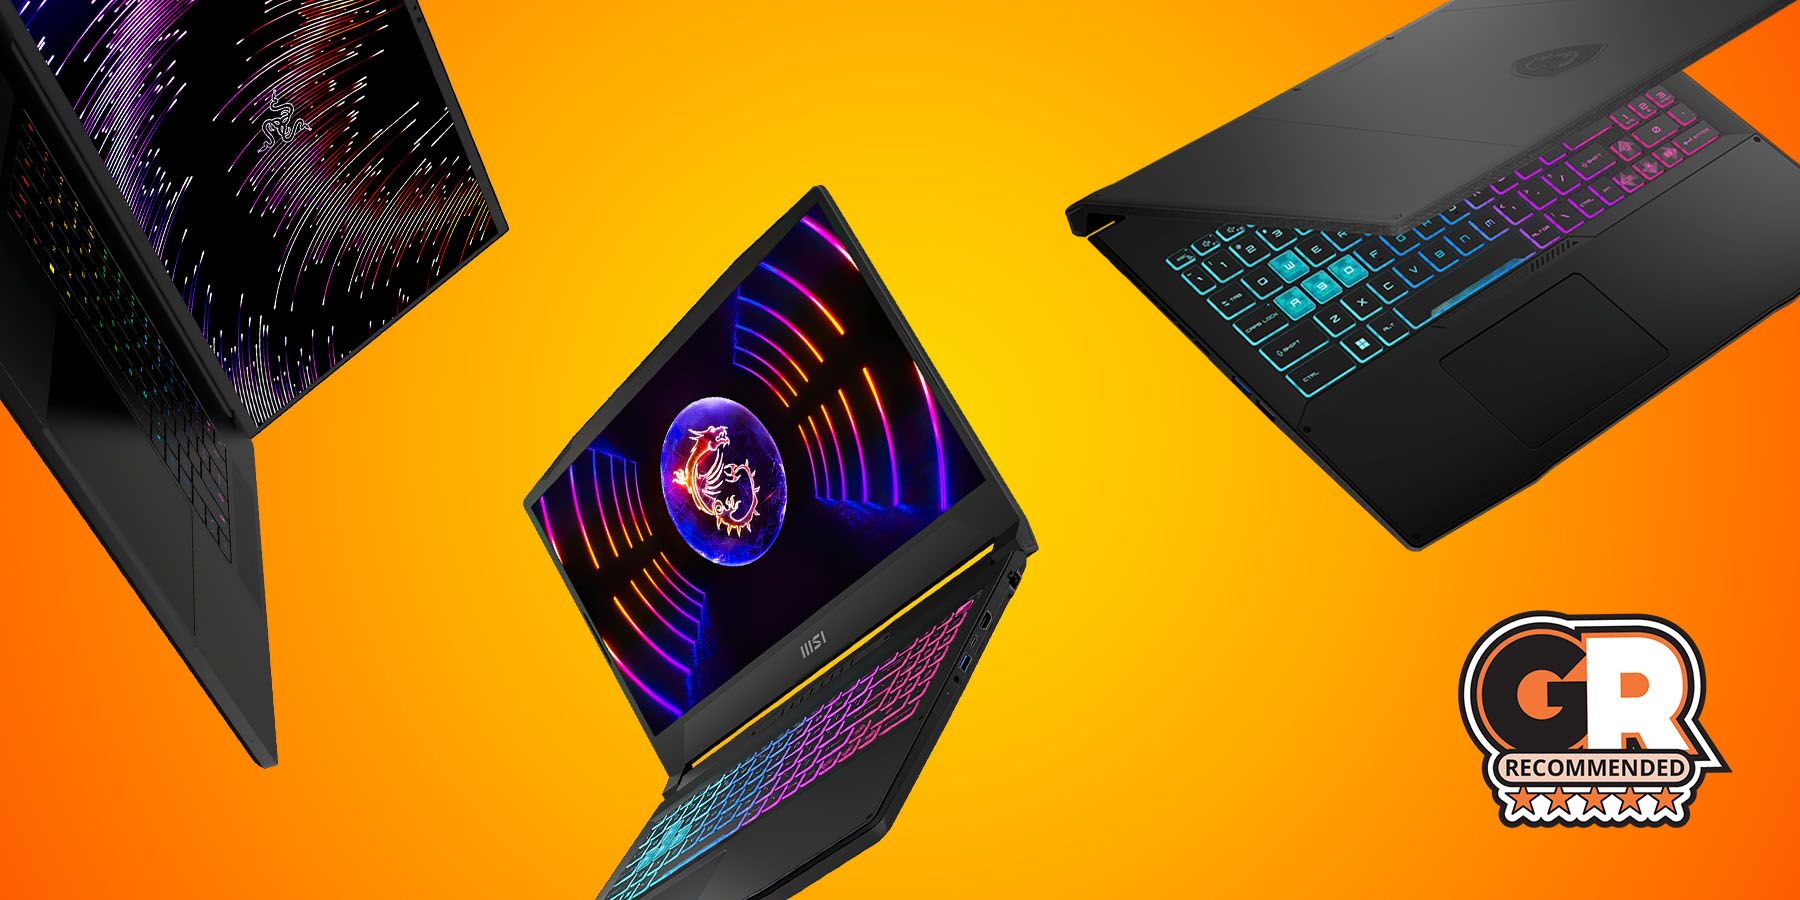 How to Choose the Best Gaming Laptop on Amazon